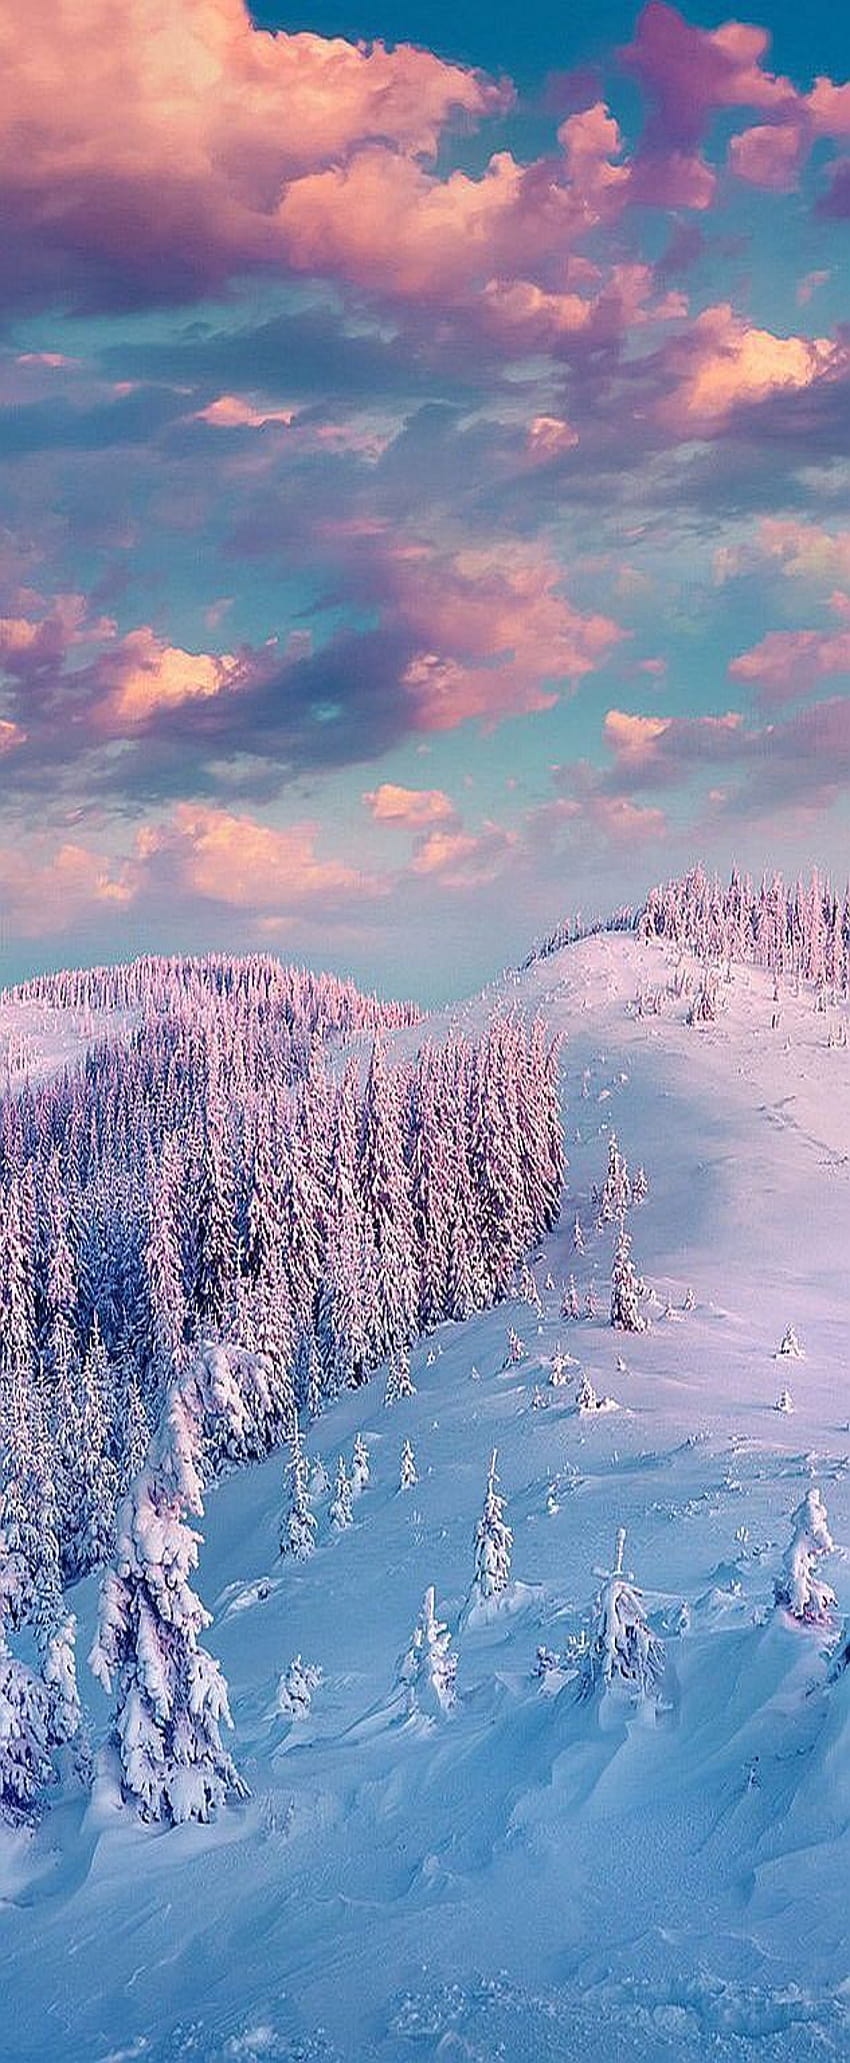 Pink Aesthetic Snow Landscape posted by Sarah Anderson, winter aesthetics blue HD phone wallpaper